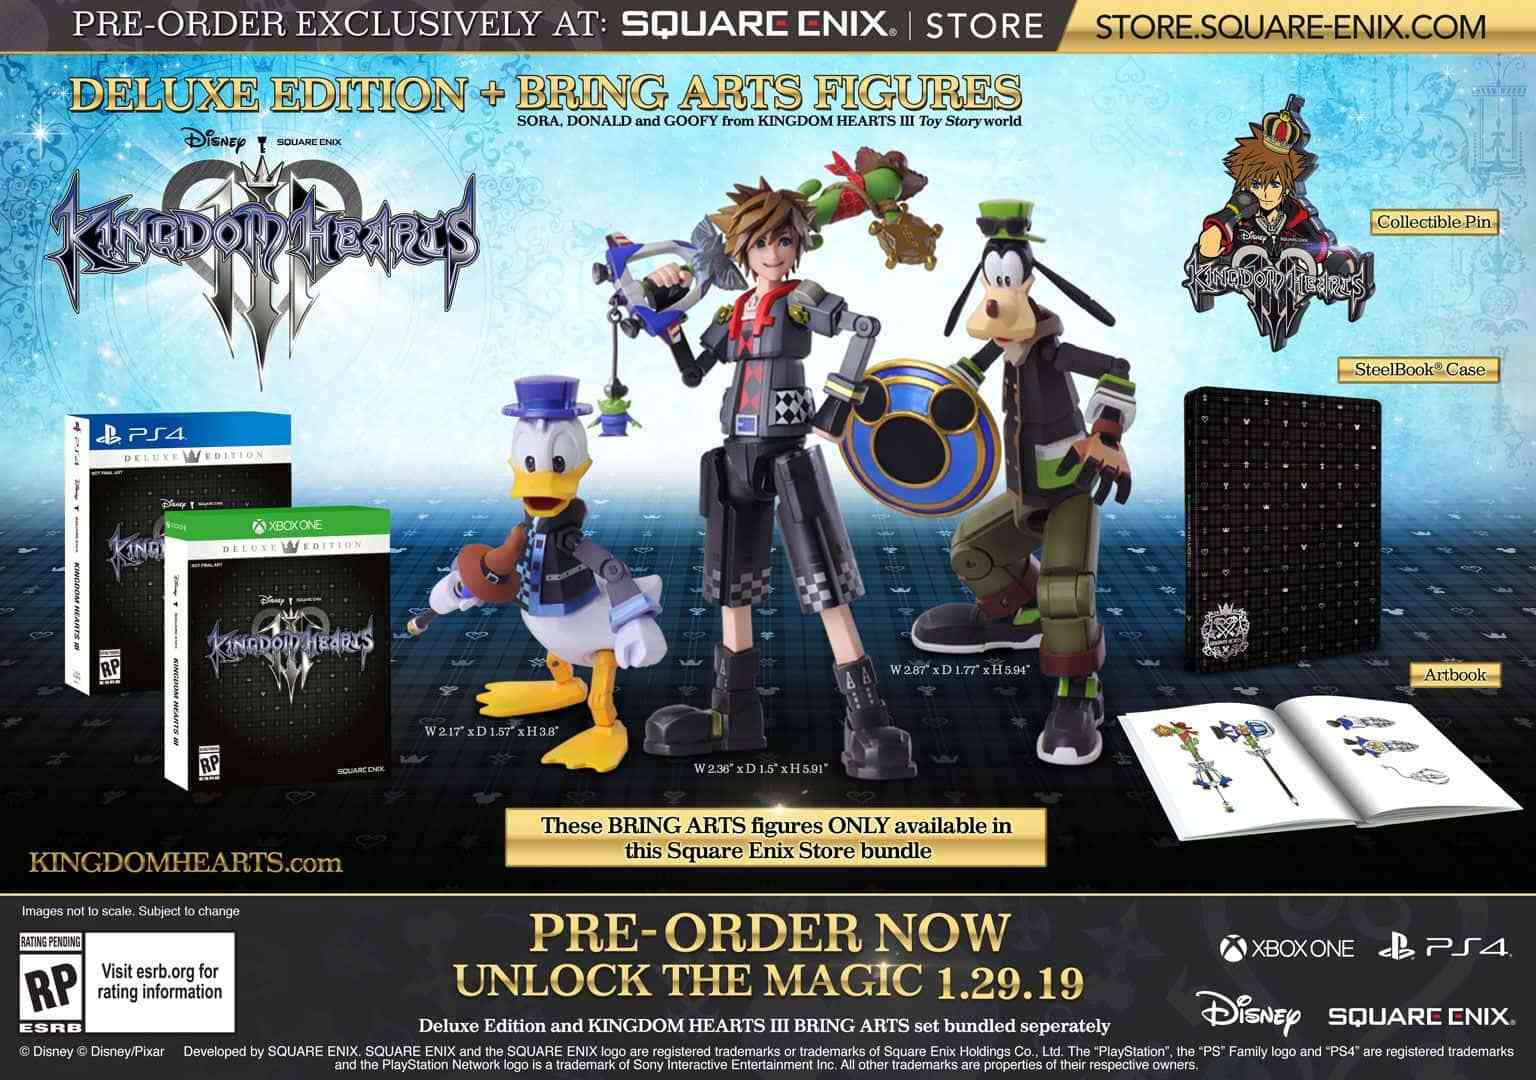 is the kingdom hearts 3 deluxe edition amazon